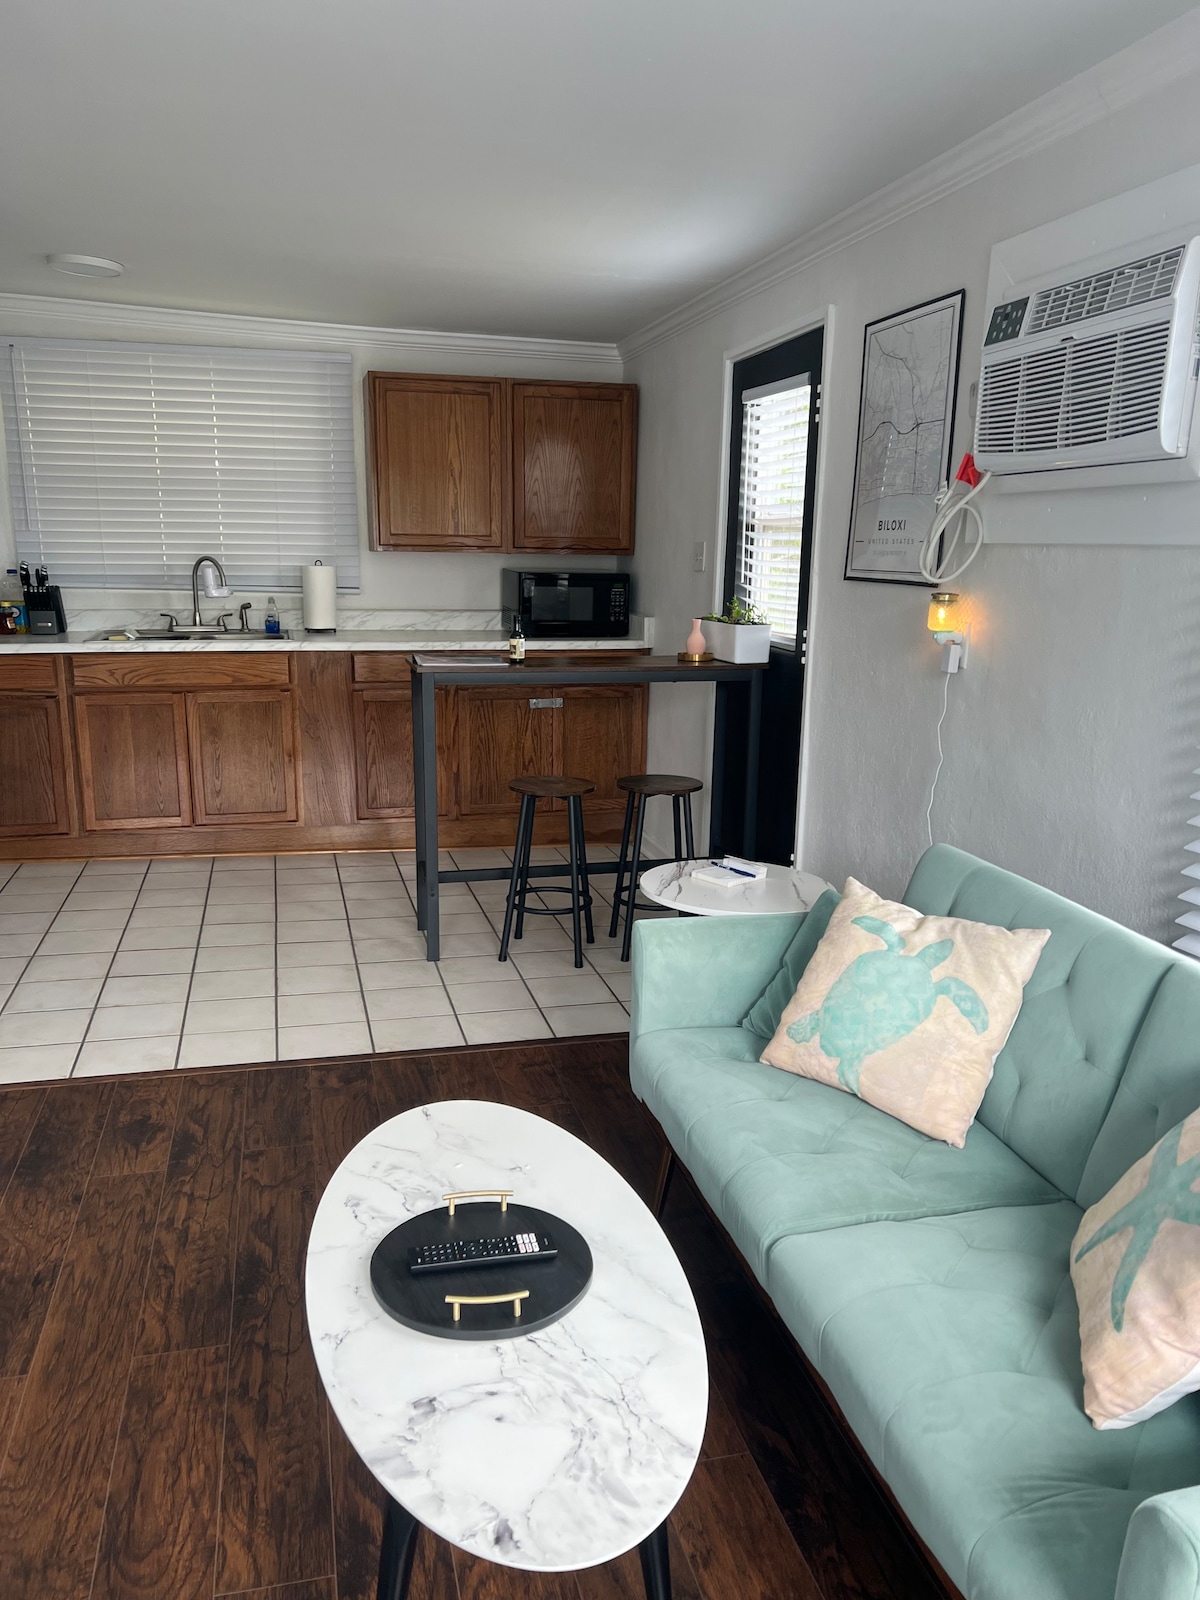 Cozy Apt. walk to Keesler AFB, beaches, and casino